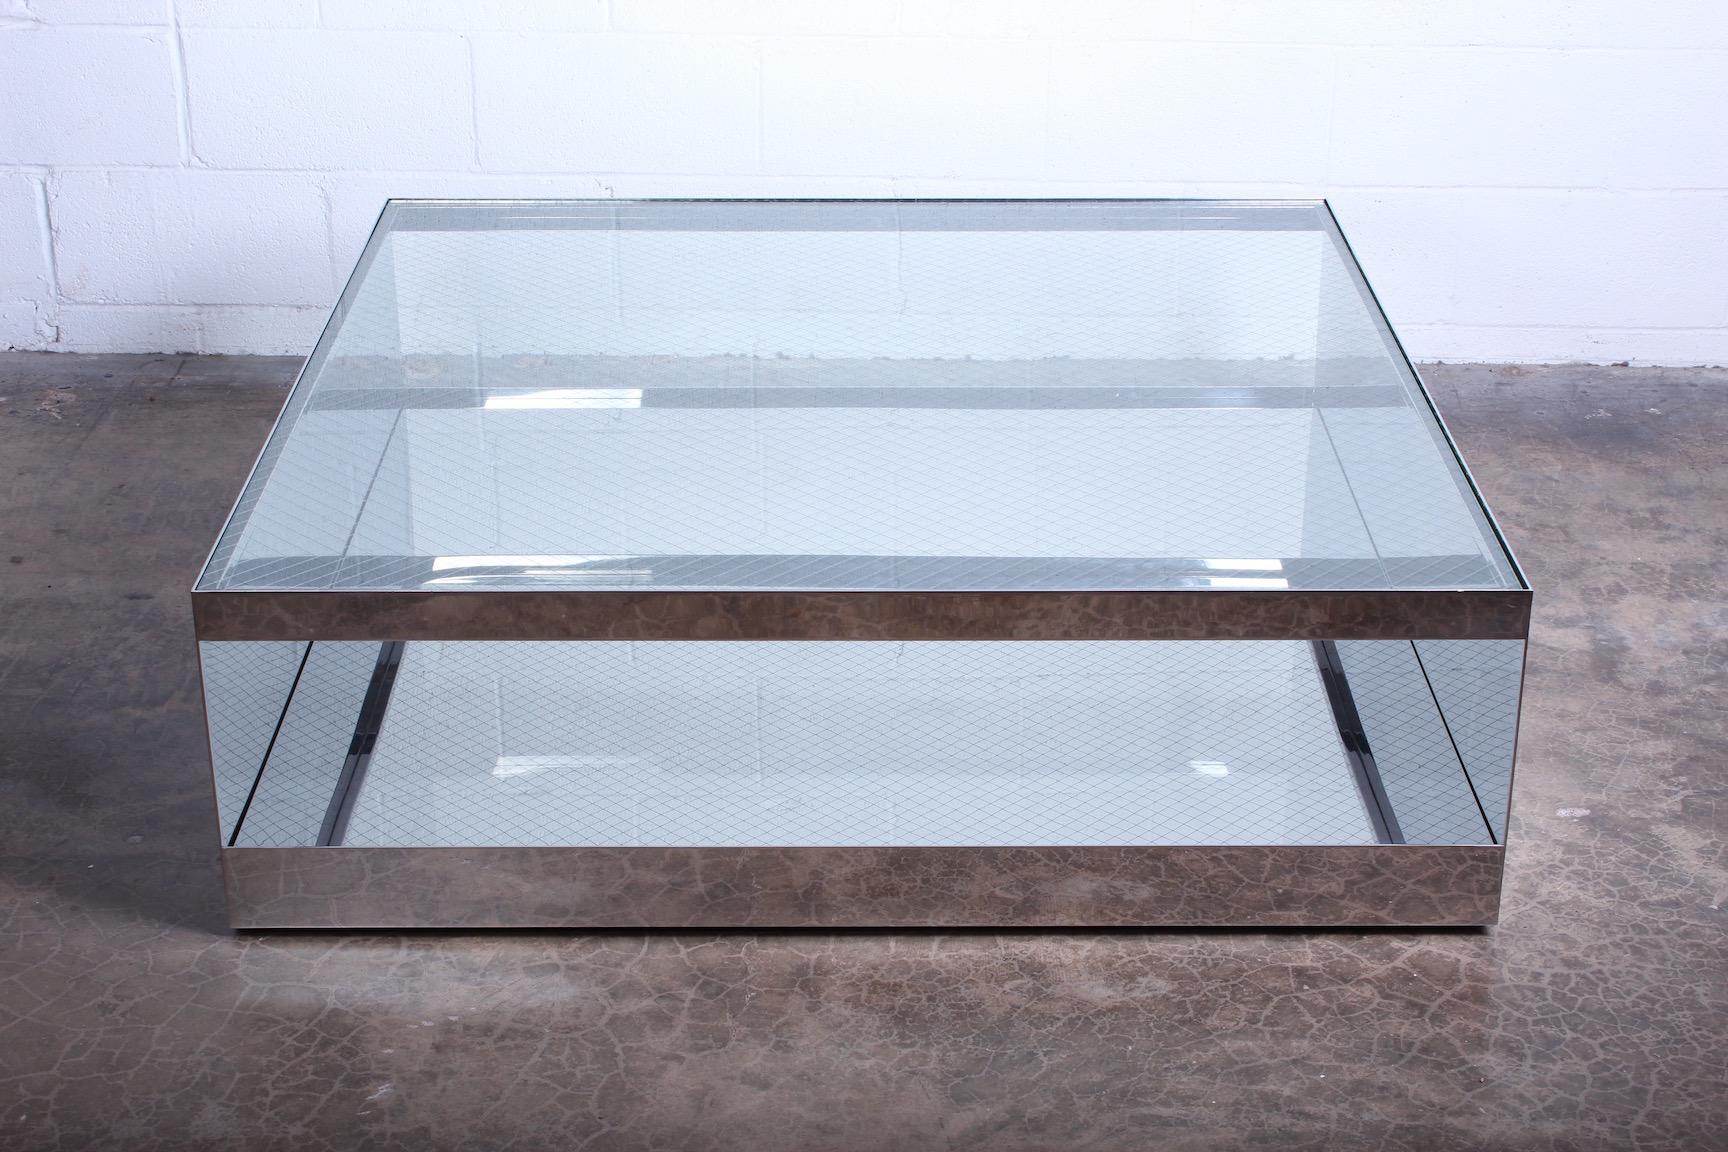 A polished stainless steel coffee table with safety glass top on casters. Designed by Joe D'urso for Knoll.